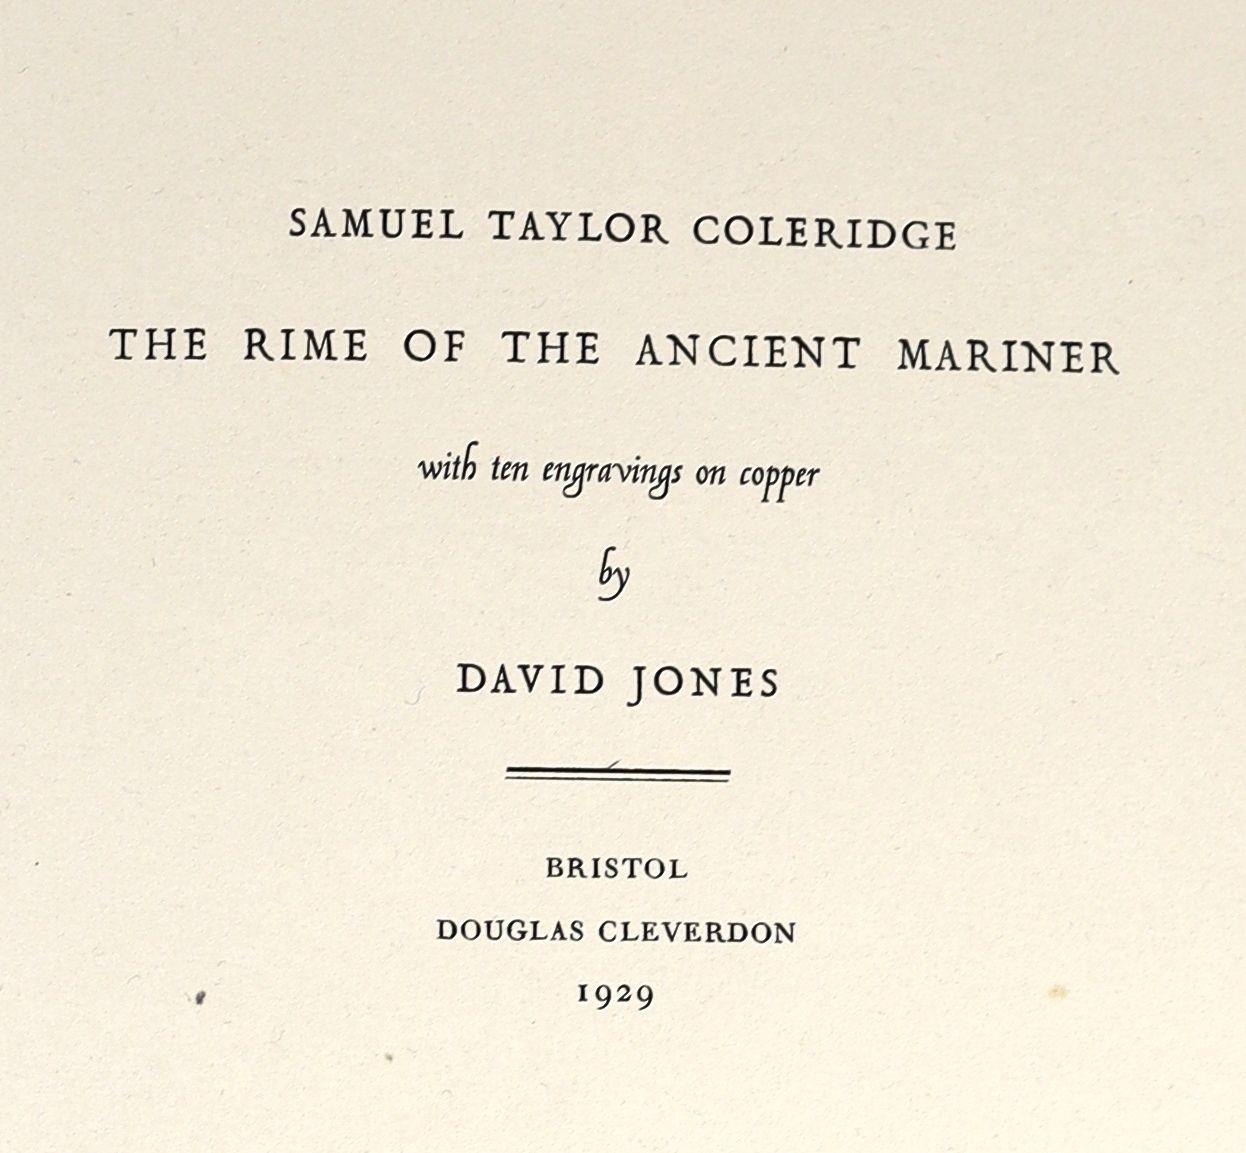 ° ° Coleridge, Samuel Taylor - The Rime of the Ancient Mariner. Limited edition, No. 300 of 400.